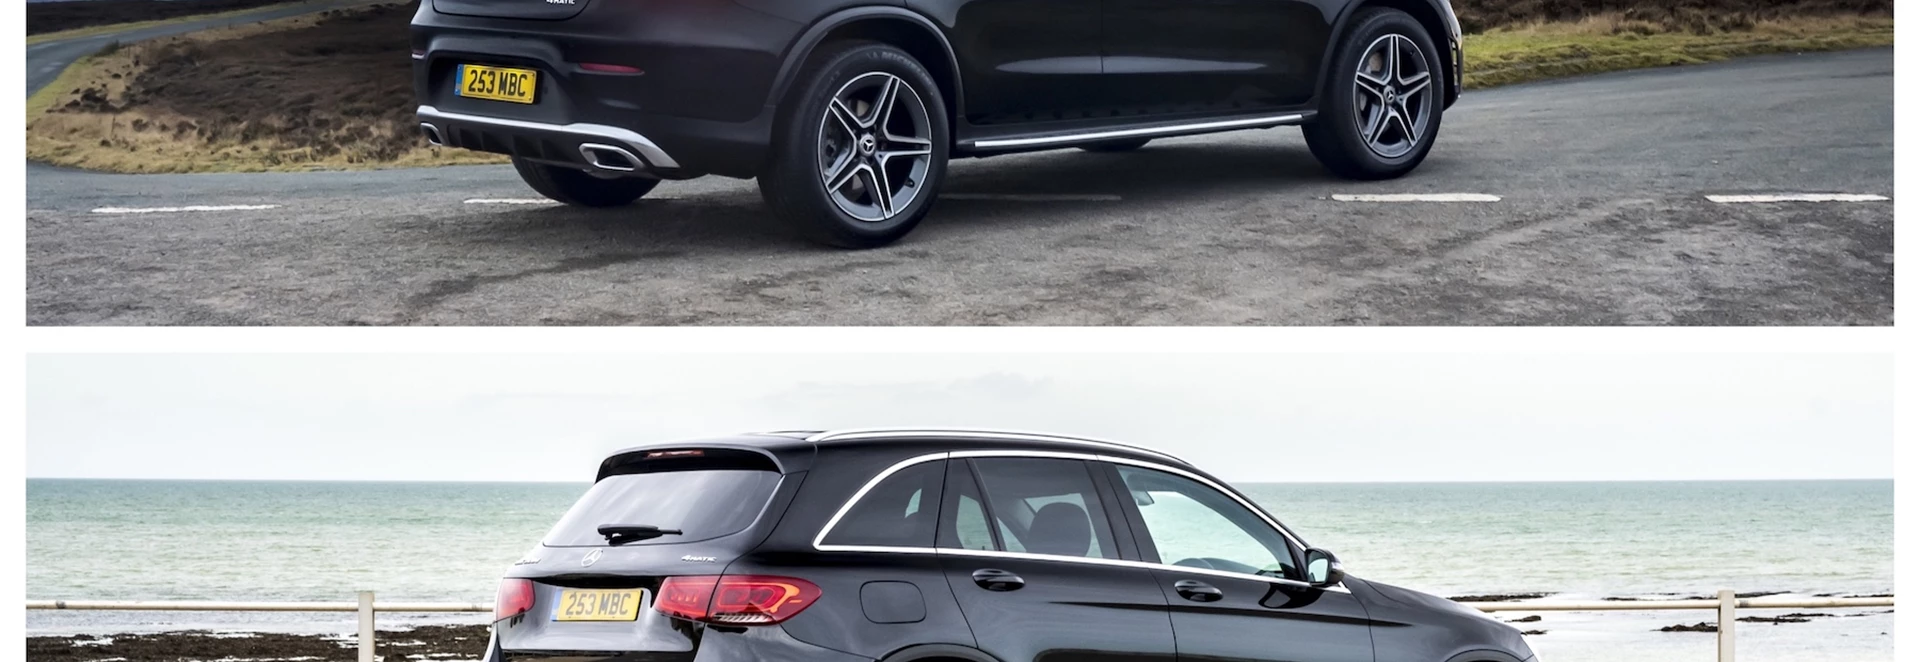 Mercedes GLC vs GLC Coupe. Which should you choose? 